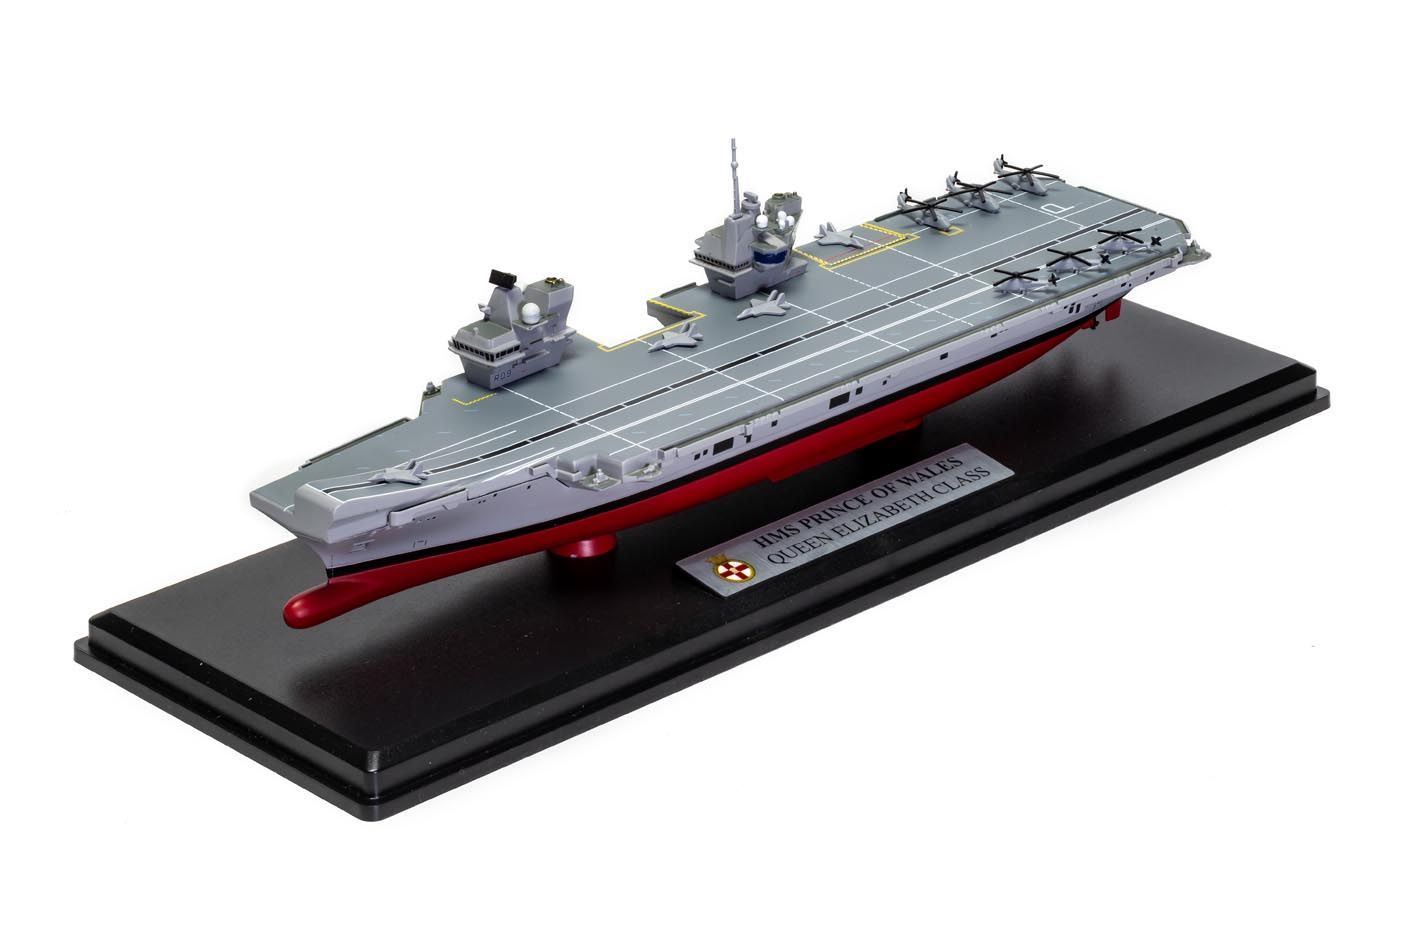 ALDO Creative Arts Collectibles Scale Model NEW / wood and resin HMS Royal Navy Prince Of Wales Queen Elizabeth-Class Aircraft Carriers With Display Cabinet